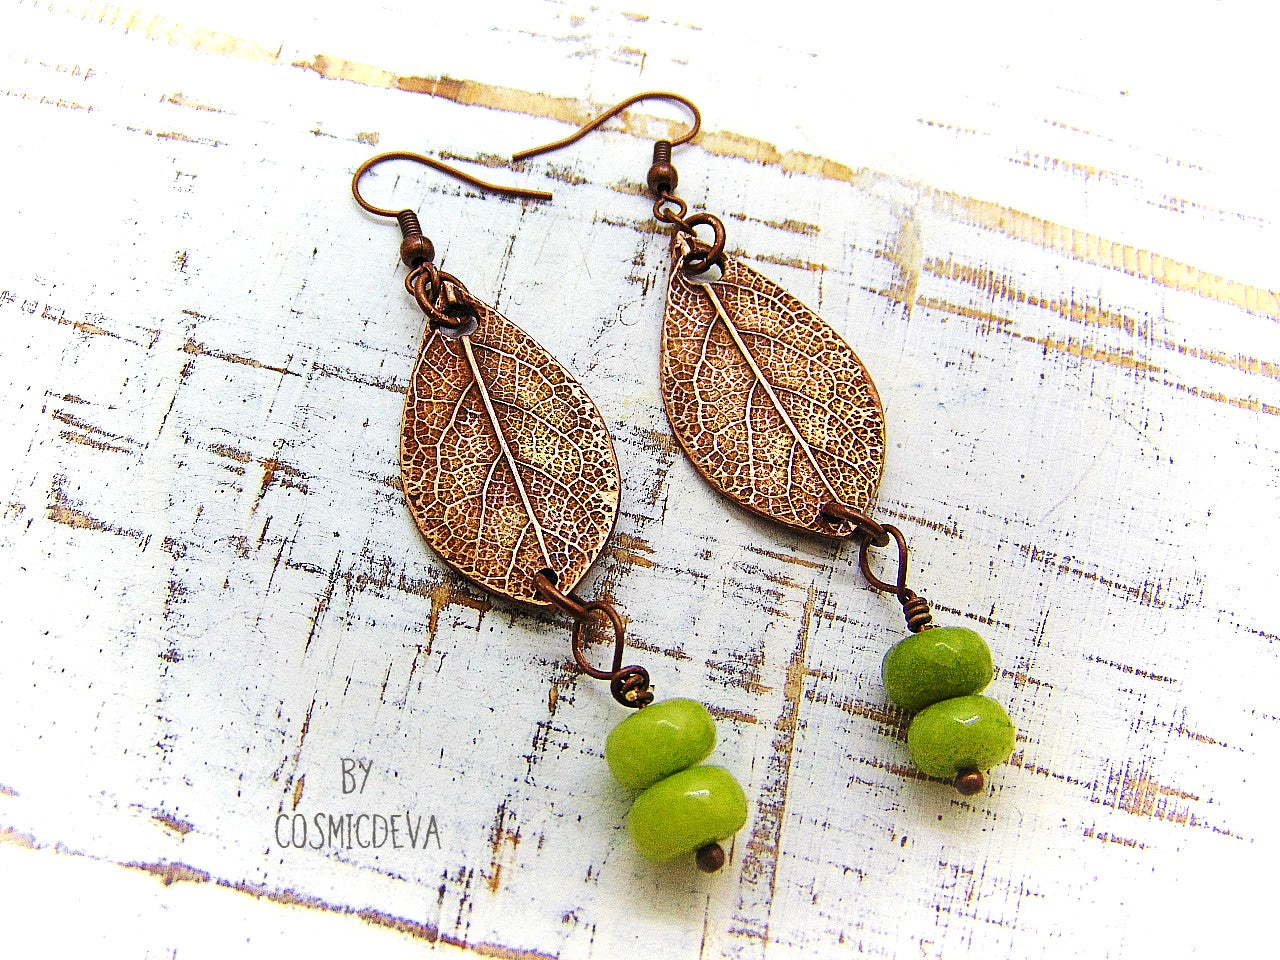 Lovely uniquely handcrafted sage leaf copper earrings featuring apple green dyed jade stone gemstone beads. These botanical copper earrings are made of high-quality materials with attention to details. The metal components were made by me: leaf earrings were crafted from solid copper, uniquely textured and carved and polished to bring out the highlights.  cosmicdeva